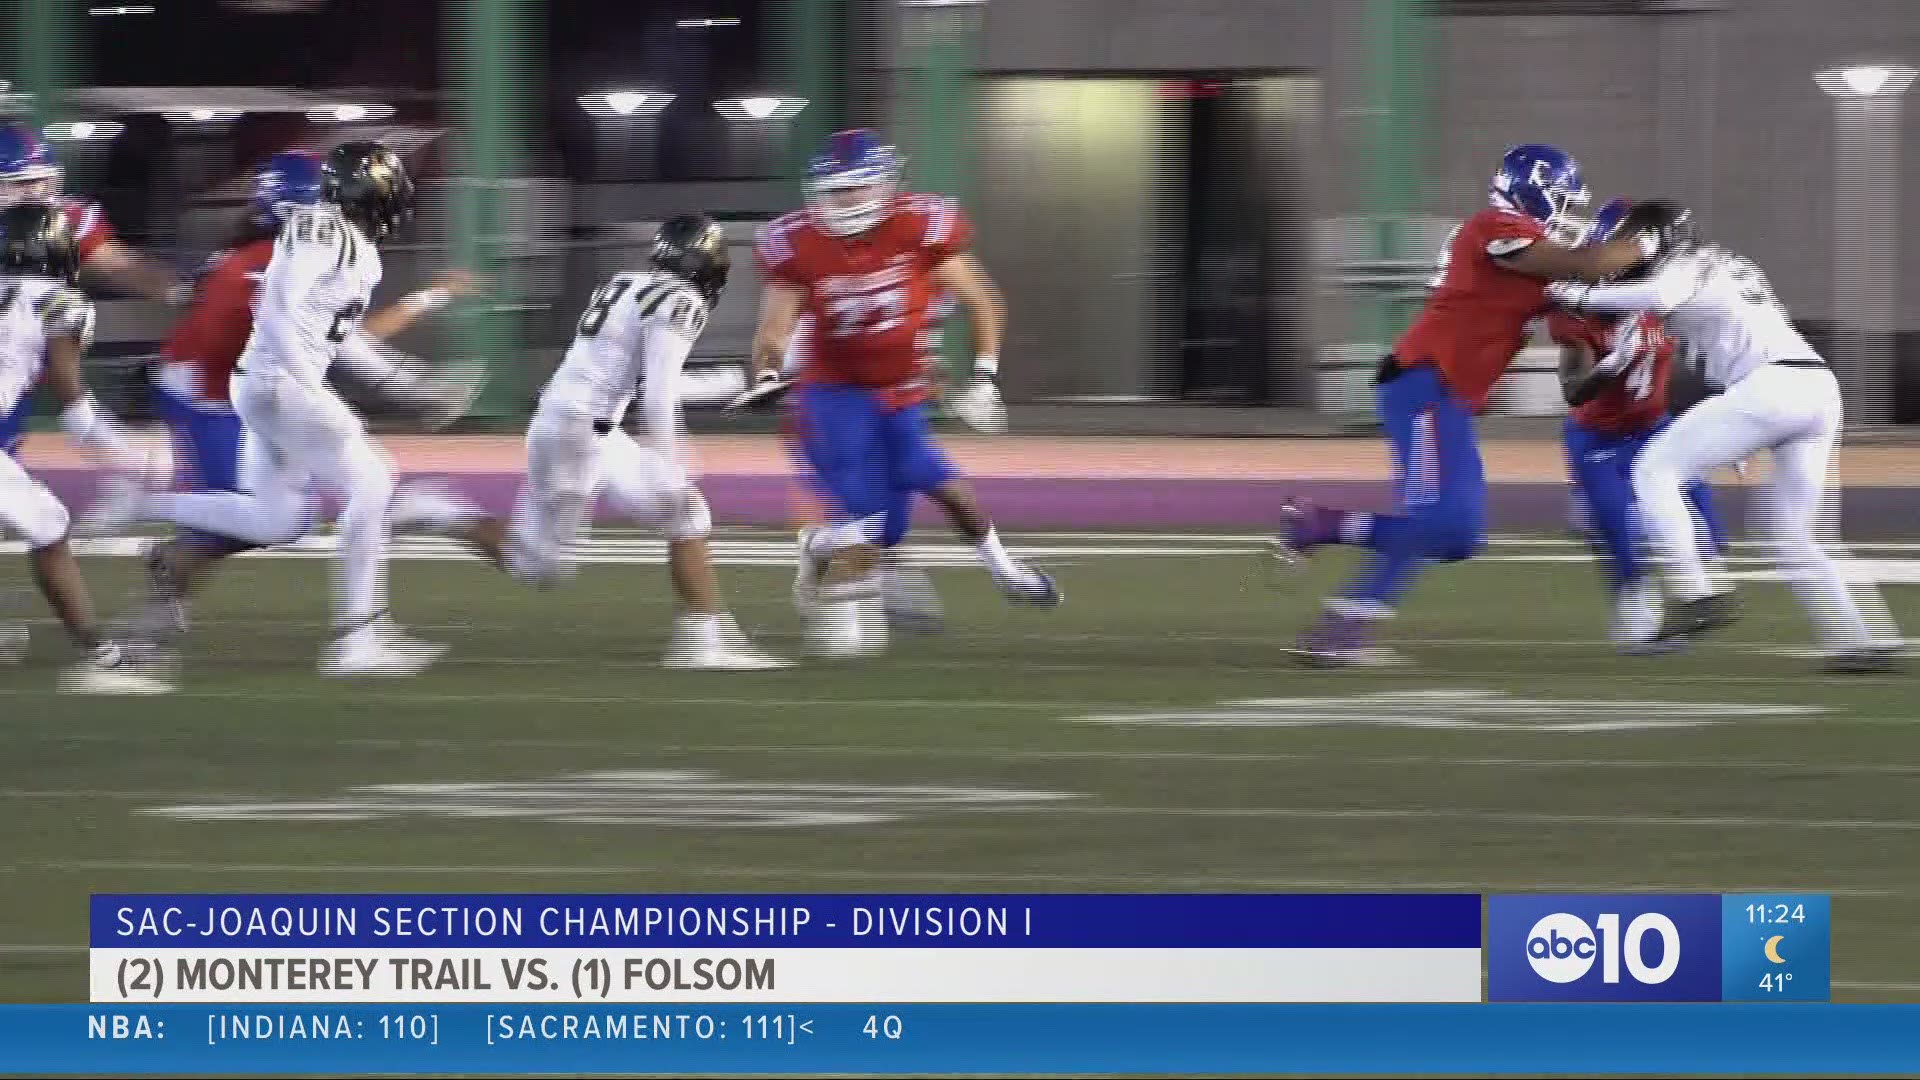 The Folsom Bulldogs will defend their NorCal Regional Championship while the Capital Christian Cougars cruise to wins in the Sac-Joaquin Section Championships.